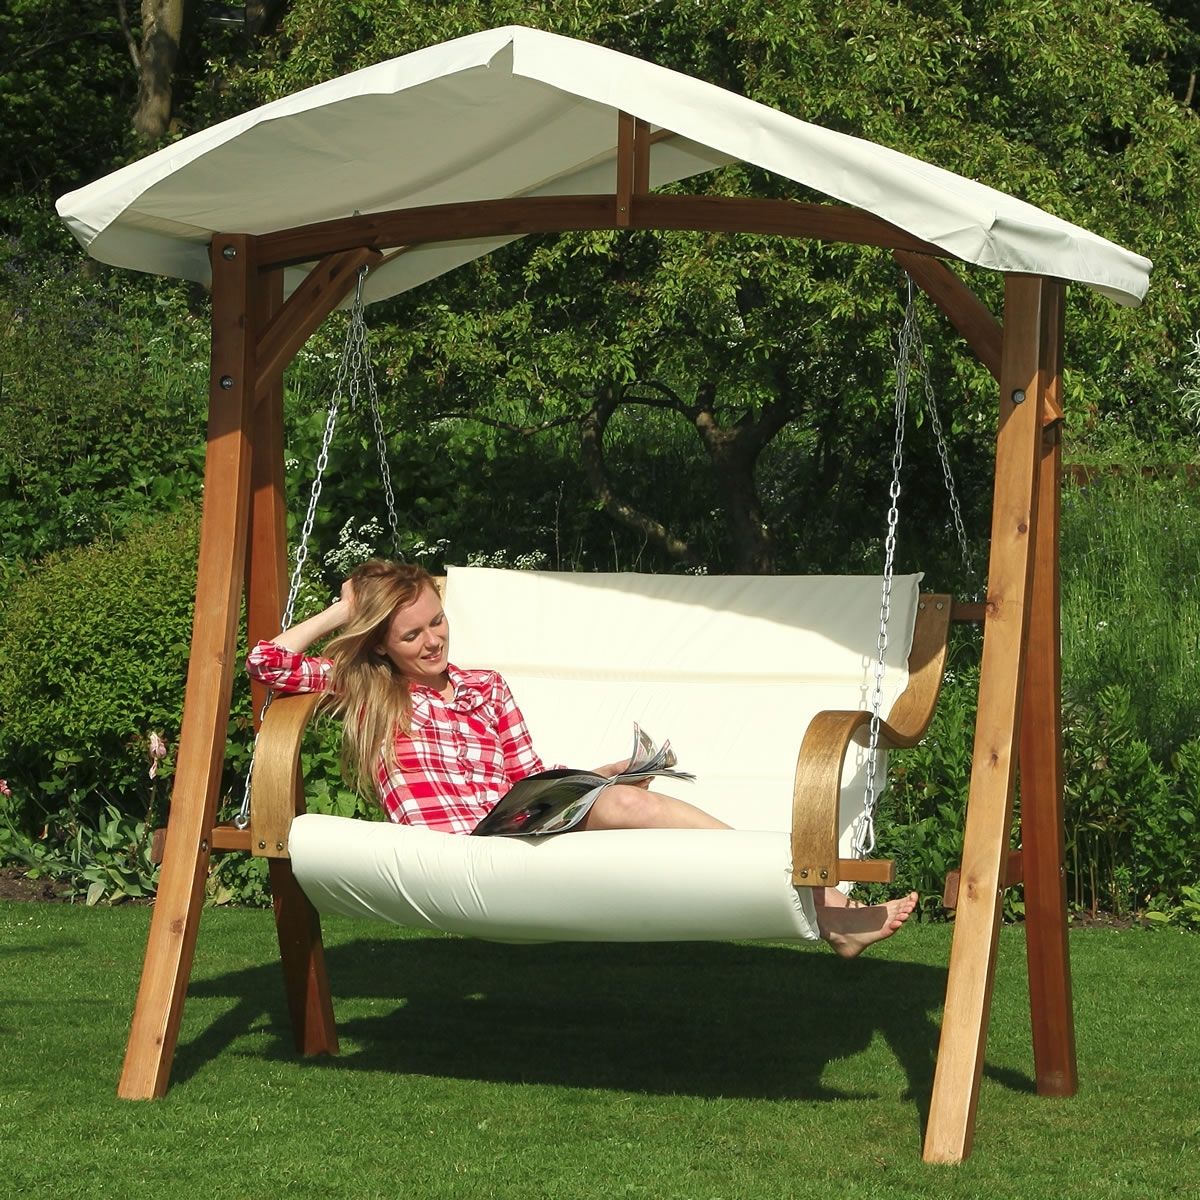 Outdoor Sofas With Canopy With Regard To Trendy Swinging Garden Chairs, Outdoor Swing Chair With Canopy (View 11 of 15)